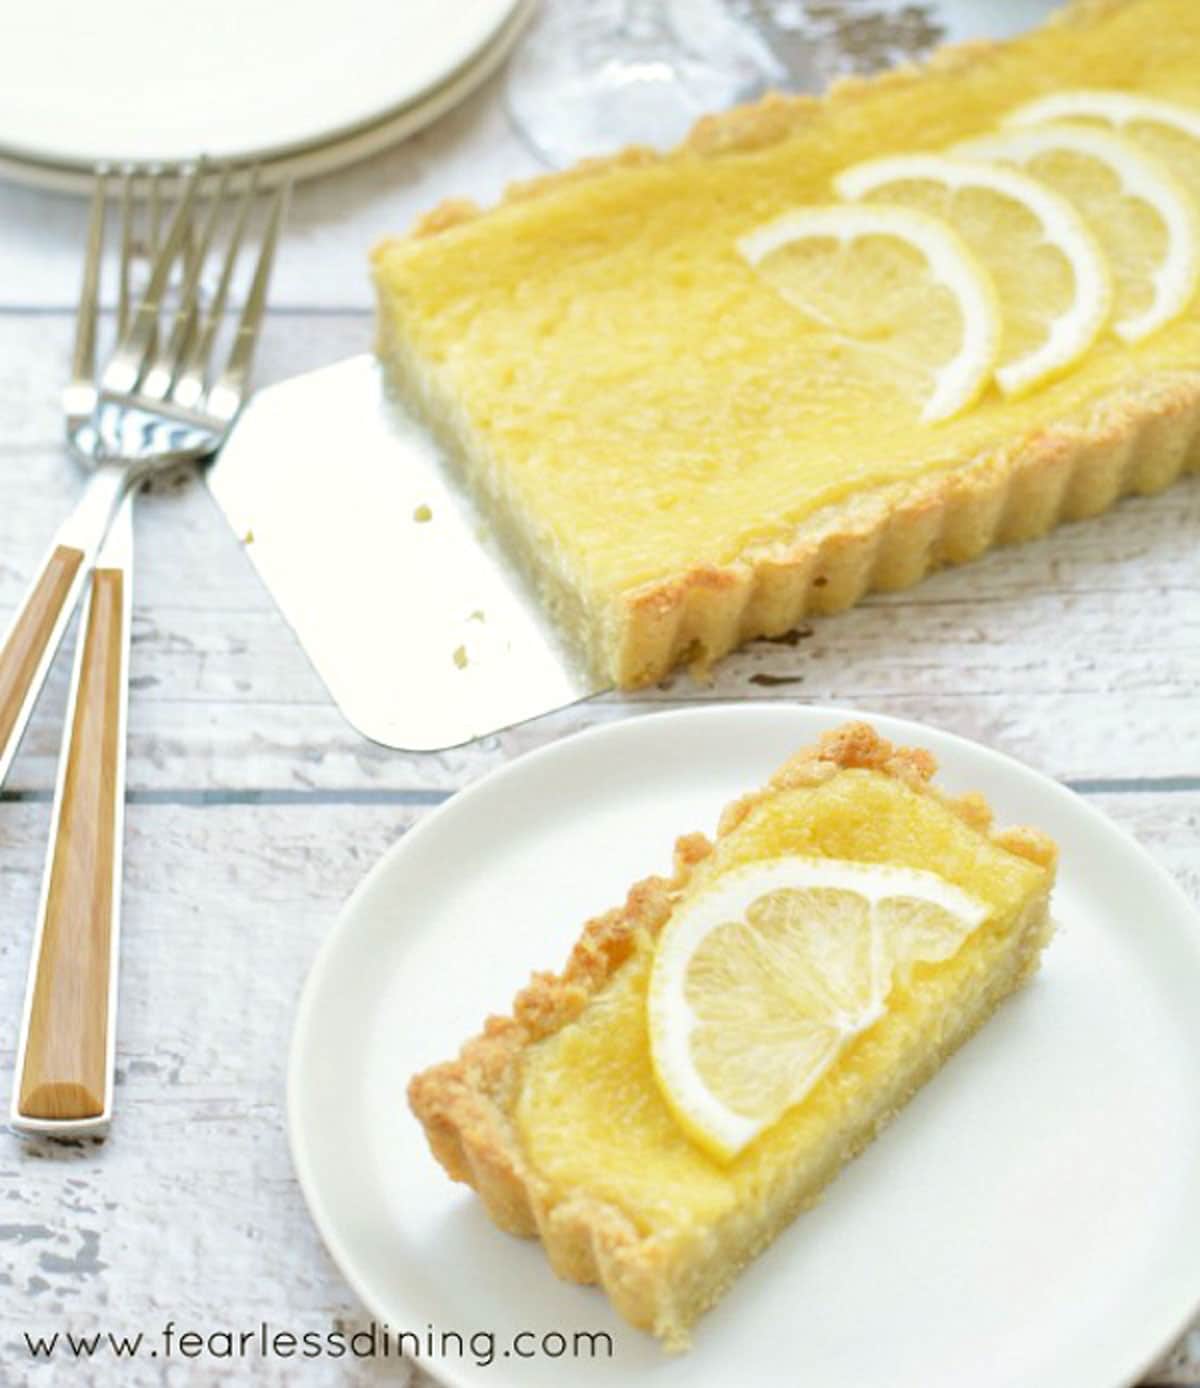 a slice of lemon tart on a white plate next to the whole tart